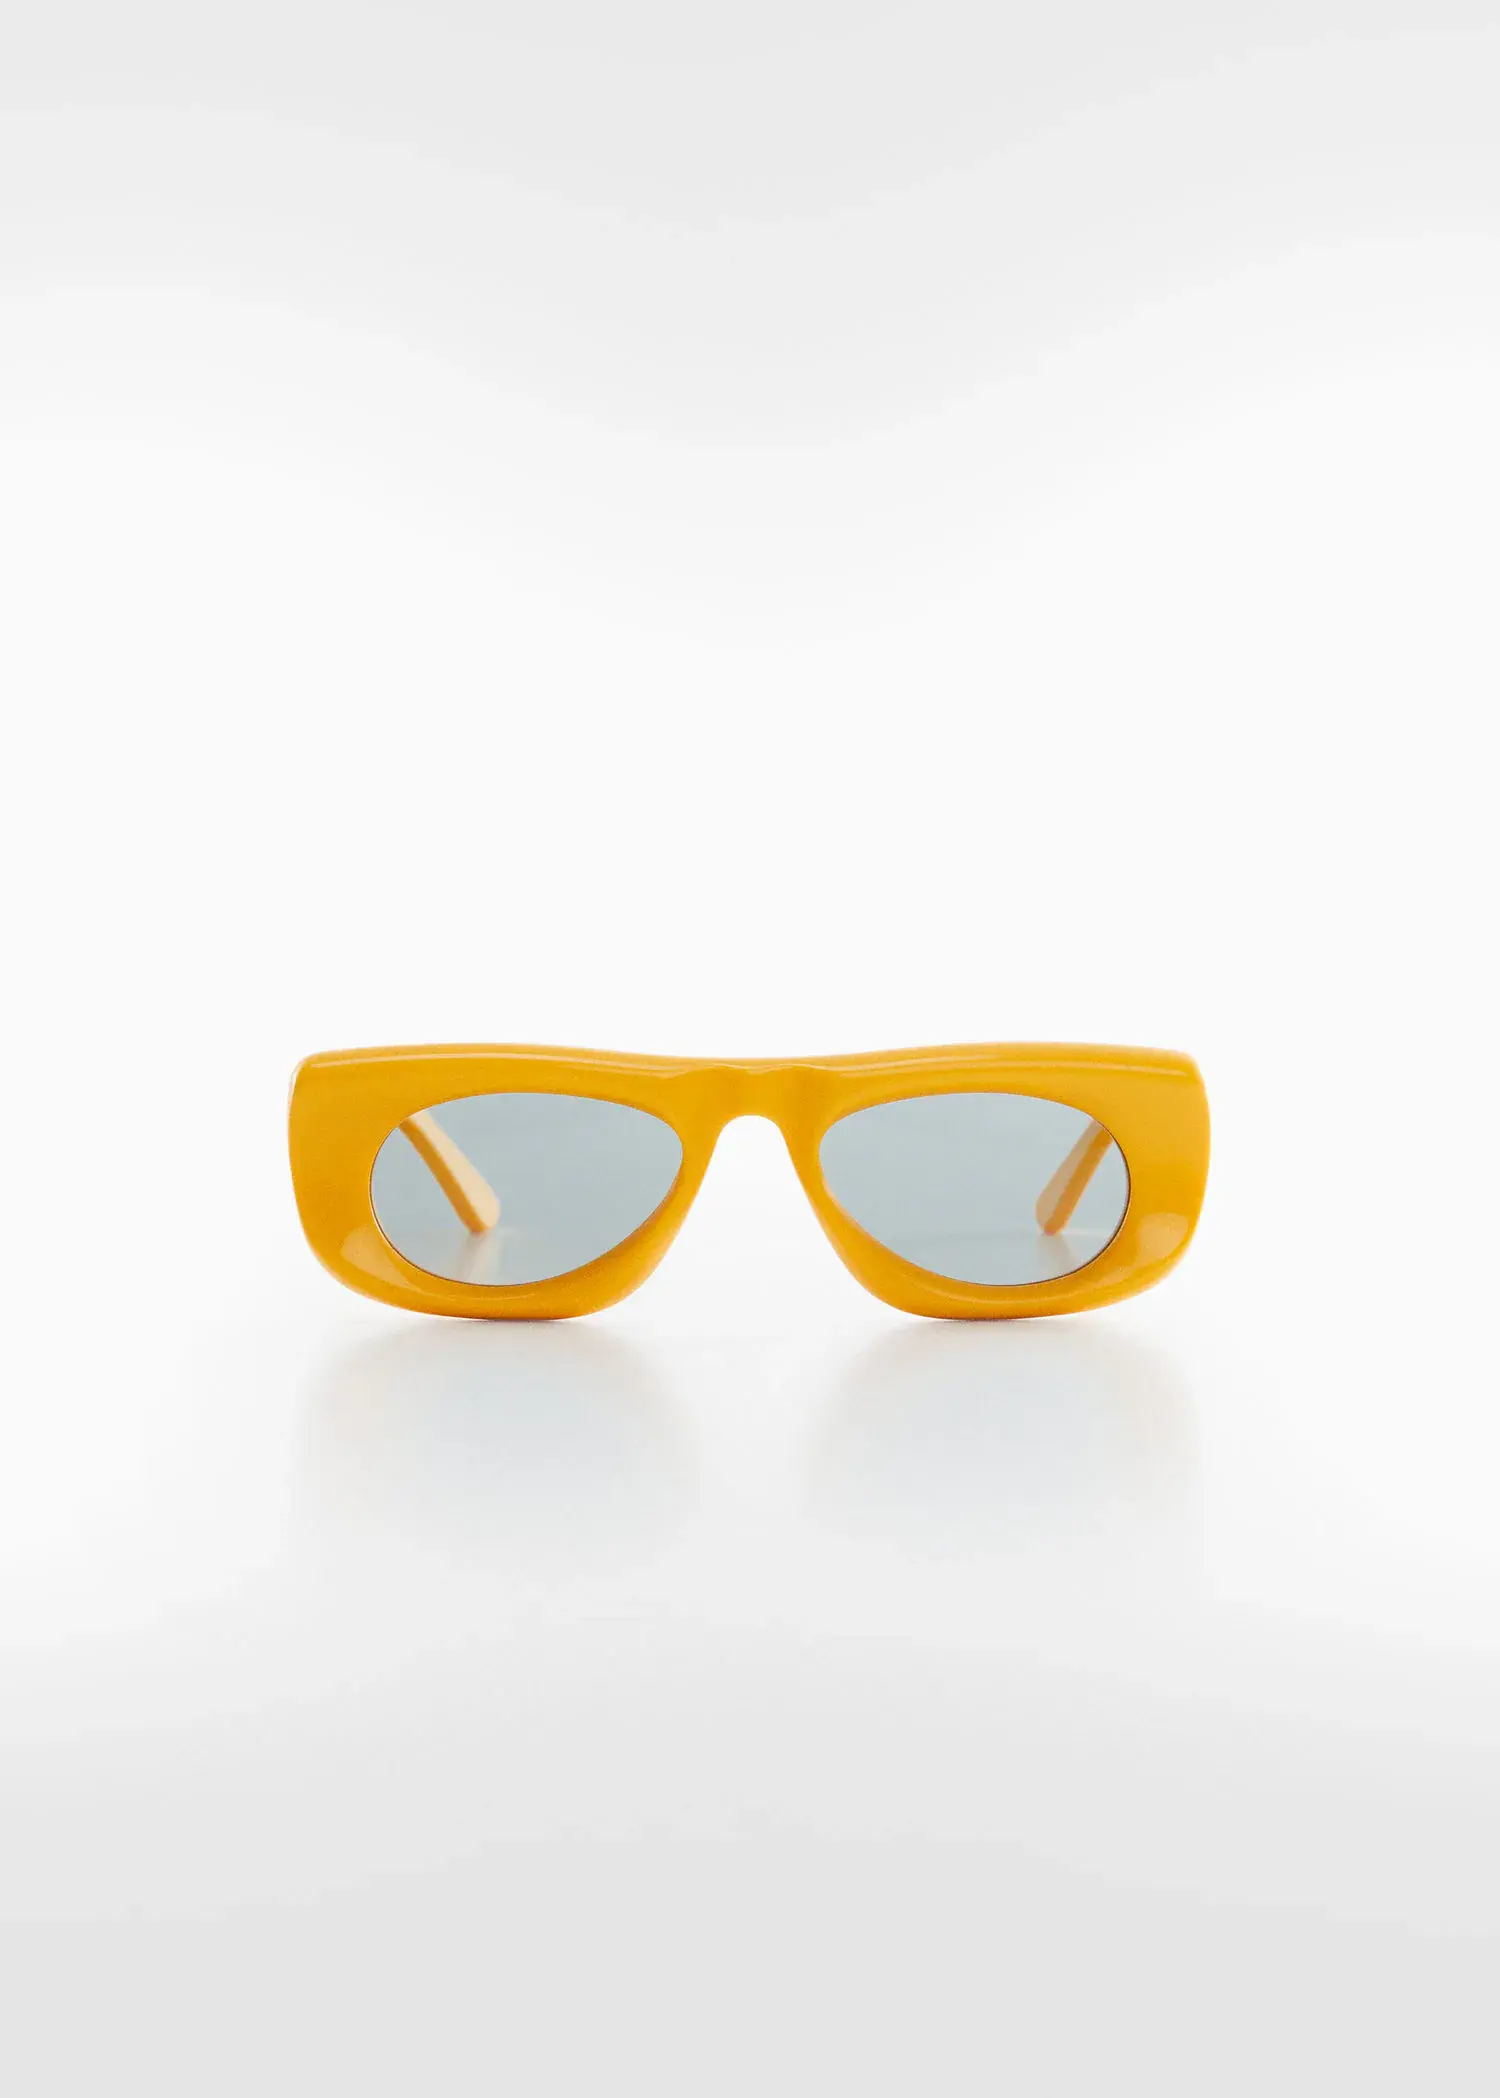 Mango Volume frame sunglasses. a pair of yellow sunglasses sitting on top of a table. 